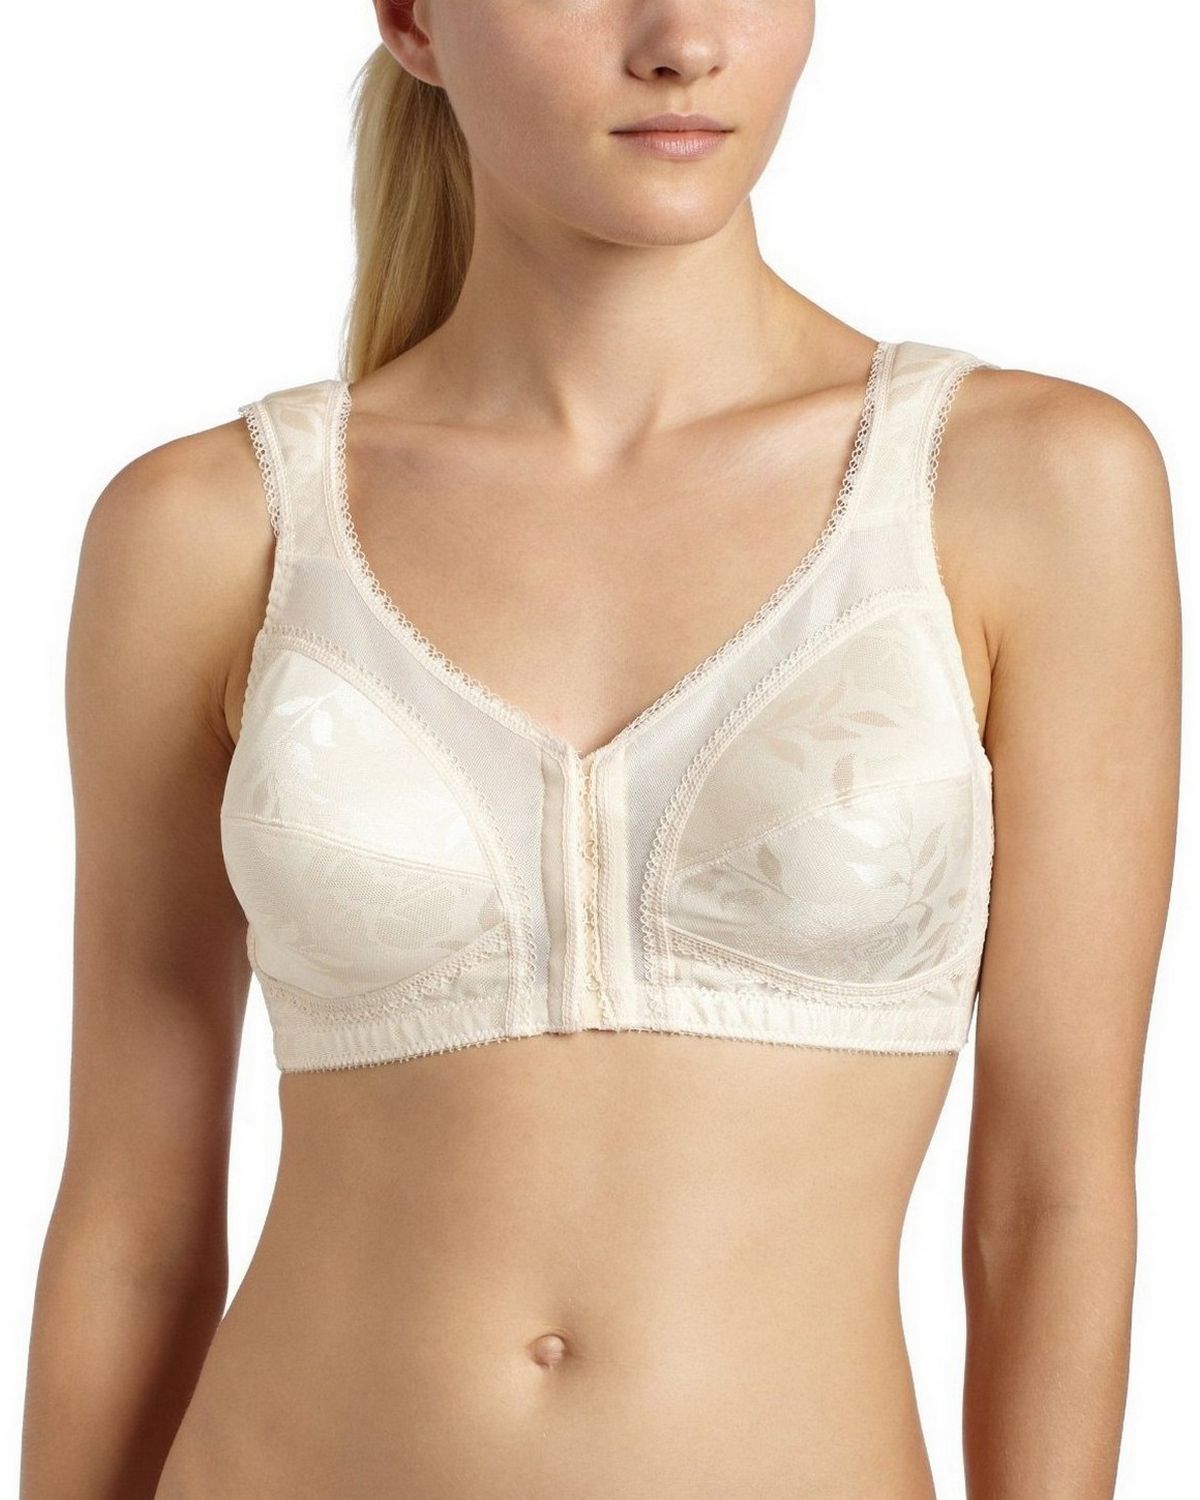 Playtex 18 Hour Easier On Front-Close Wirefree Bra Flex Back Women Comfort  Strap